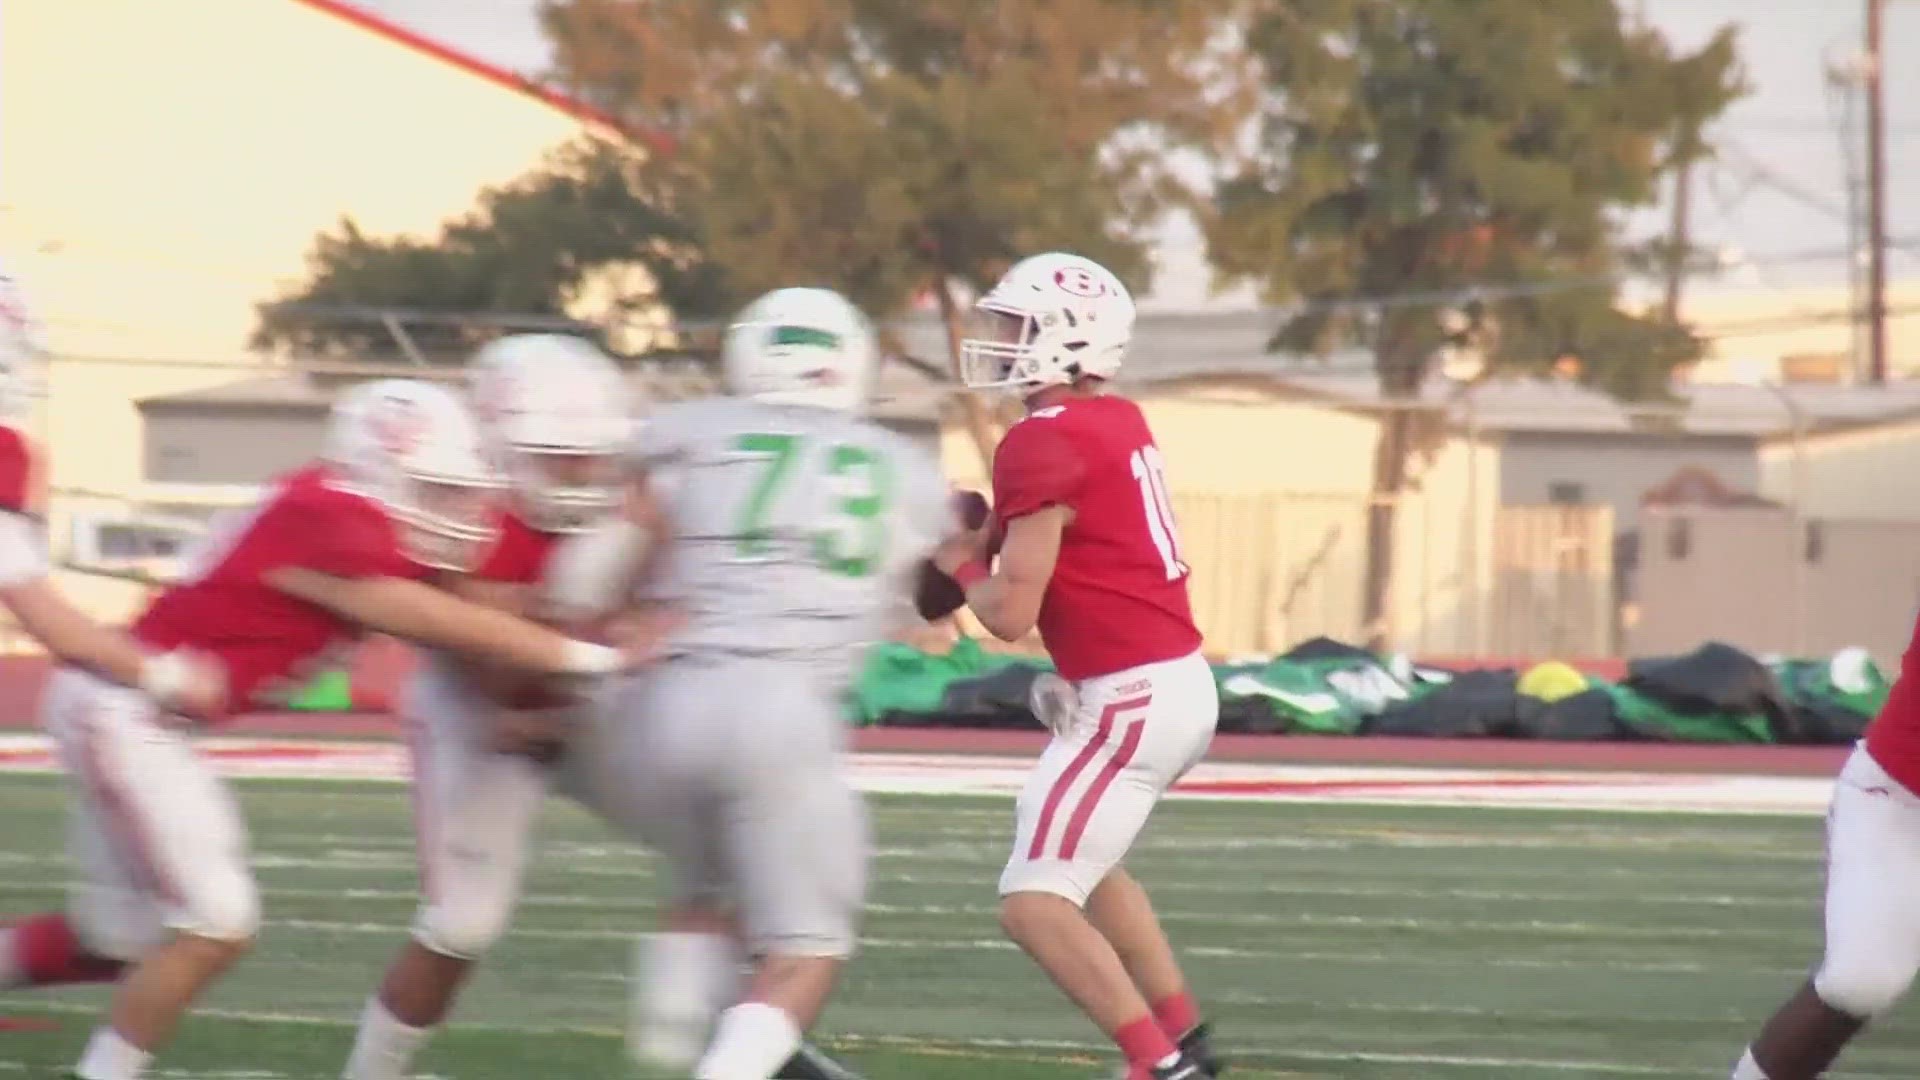 Huntsville is coming off a win over Bryan, but will face off a tough opponent in 2-0 Belton.